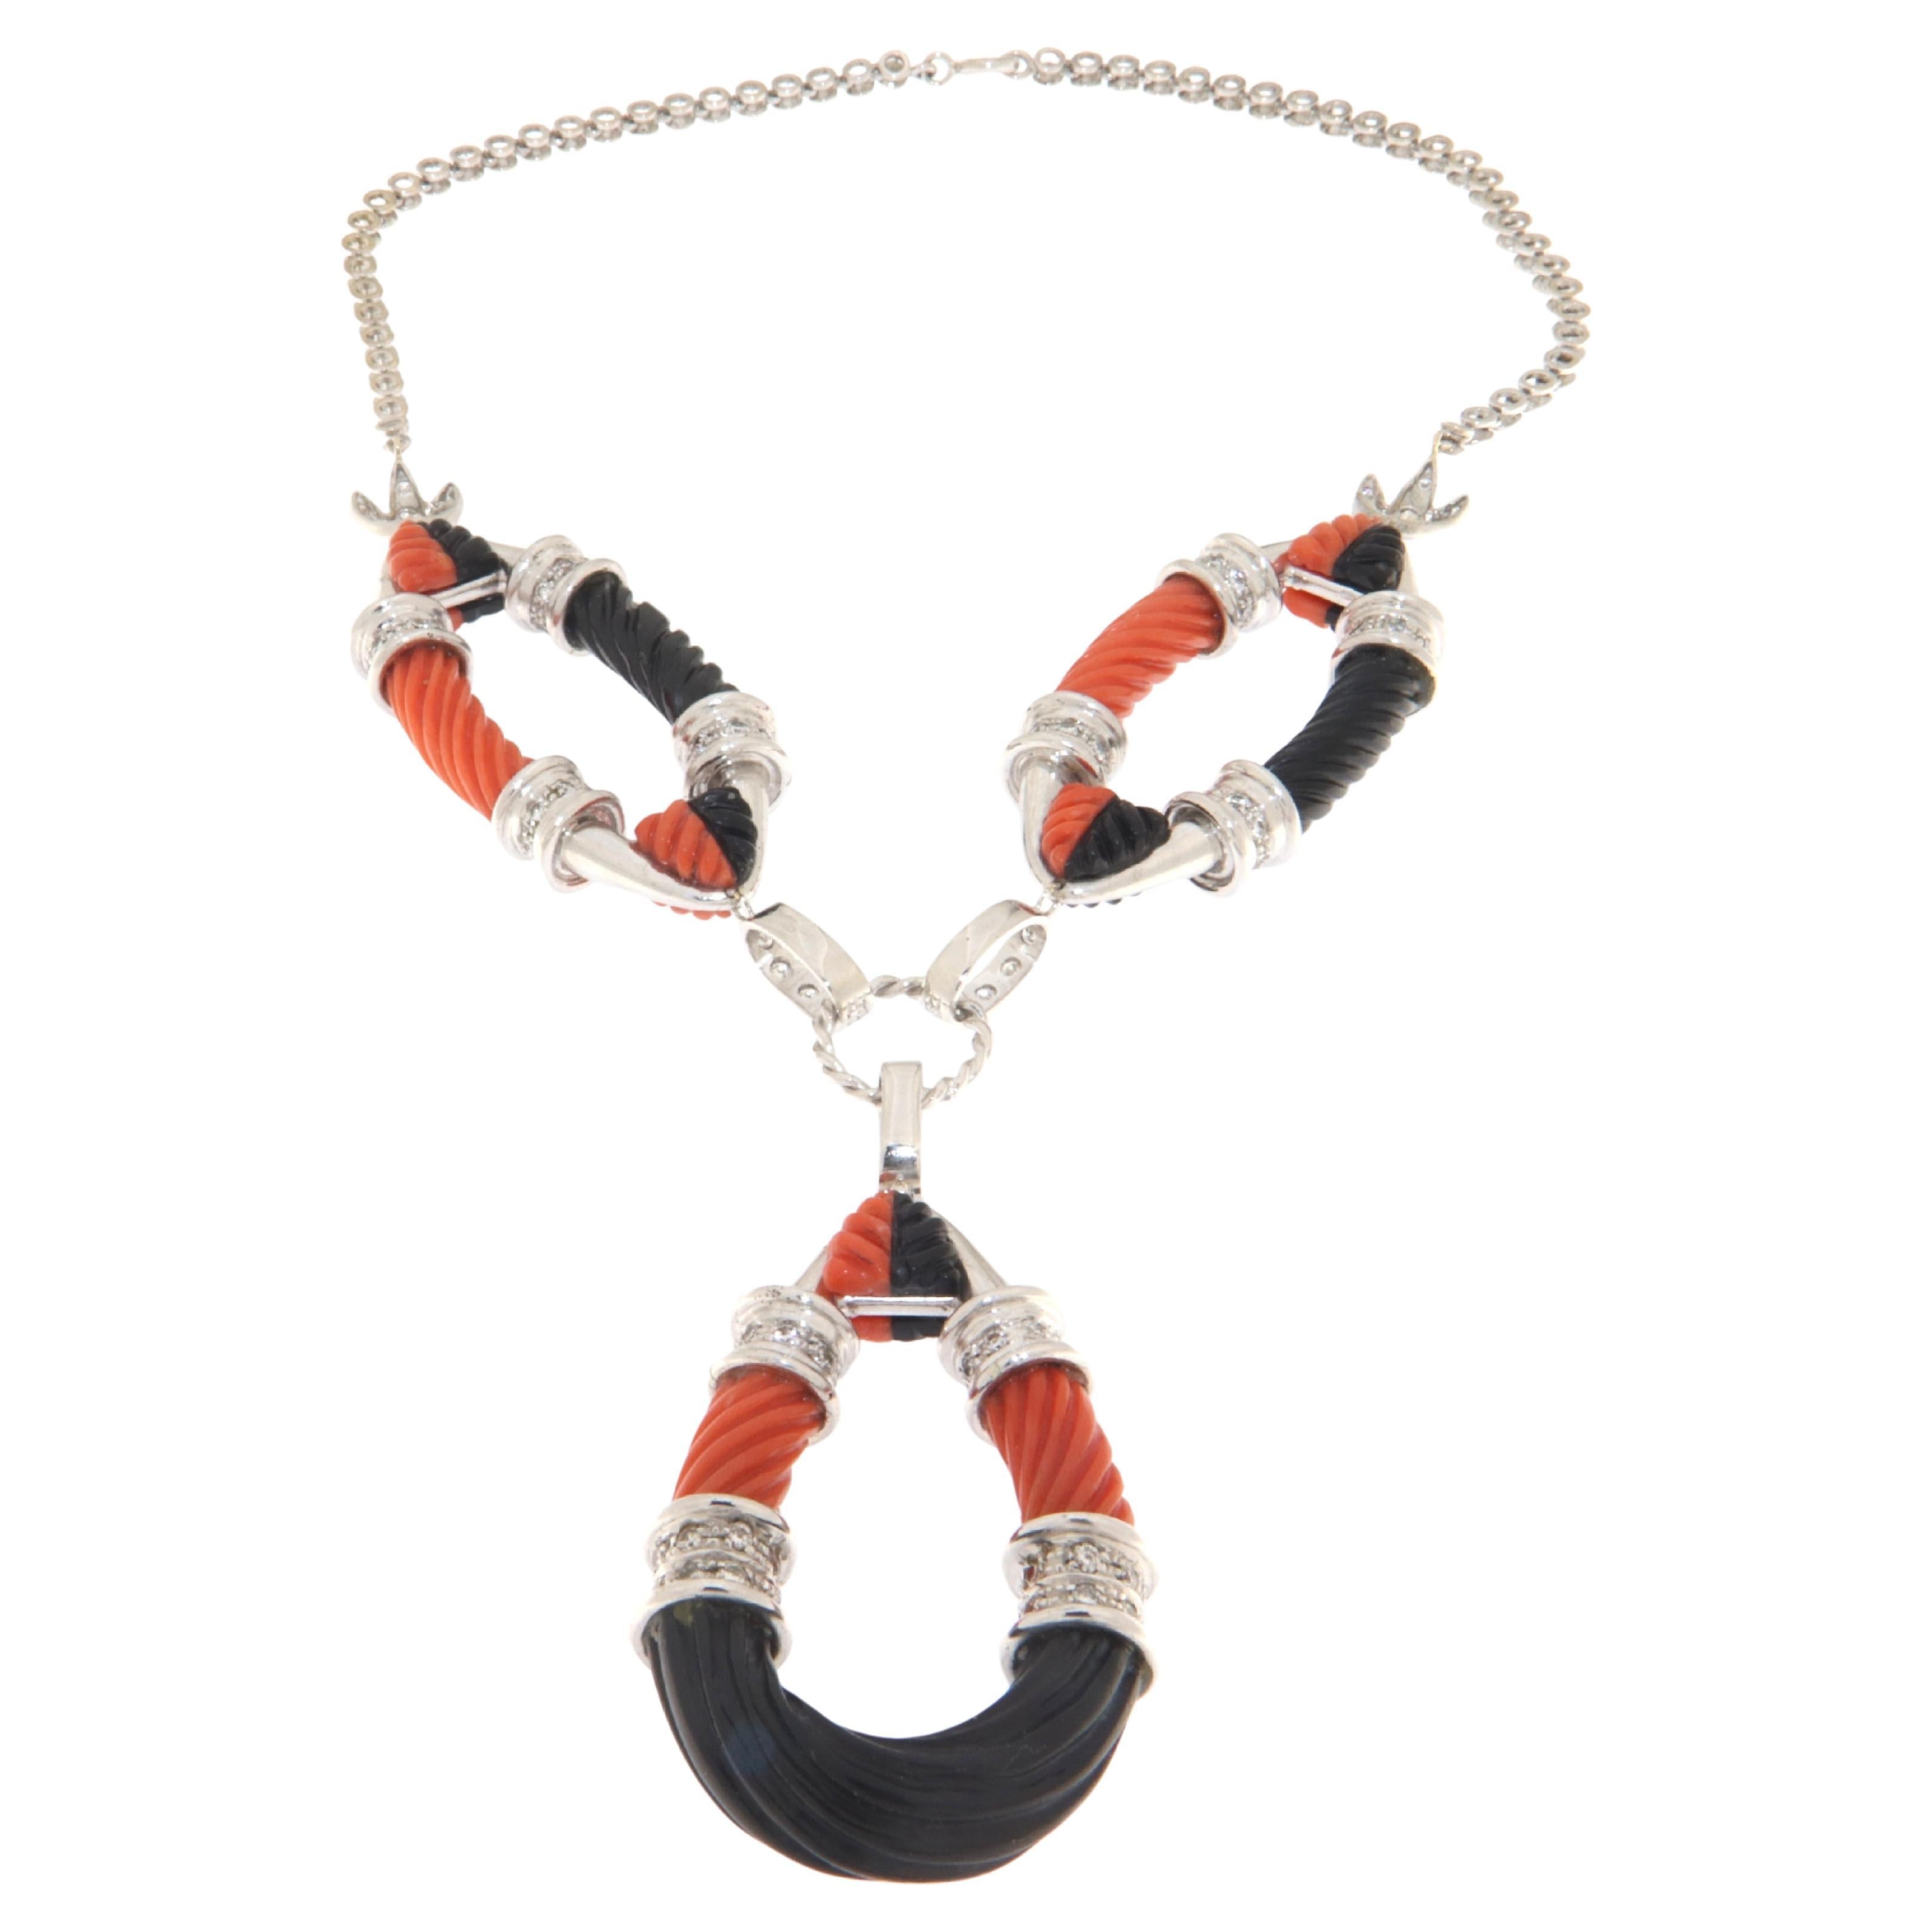 This striking necklace is a masterpiece of design, exquisitely crafted from 18-karat white gold and adorned with the vivid contrast of coral and onyx, highlighted by the sparkling brilliance of diamonds. It's a piece that not only stands out due to